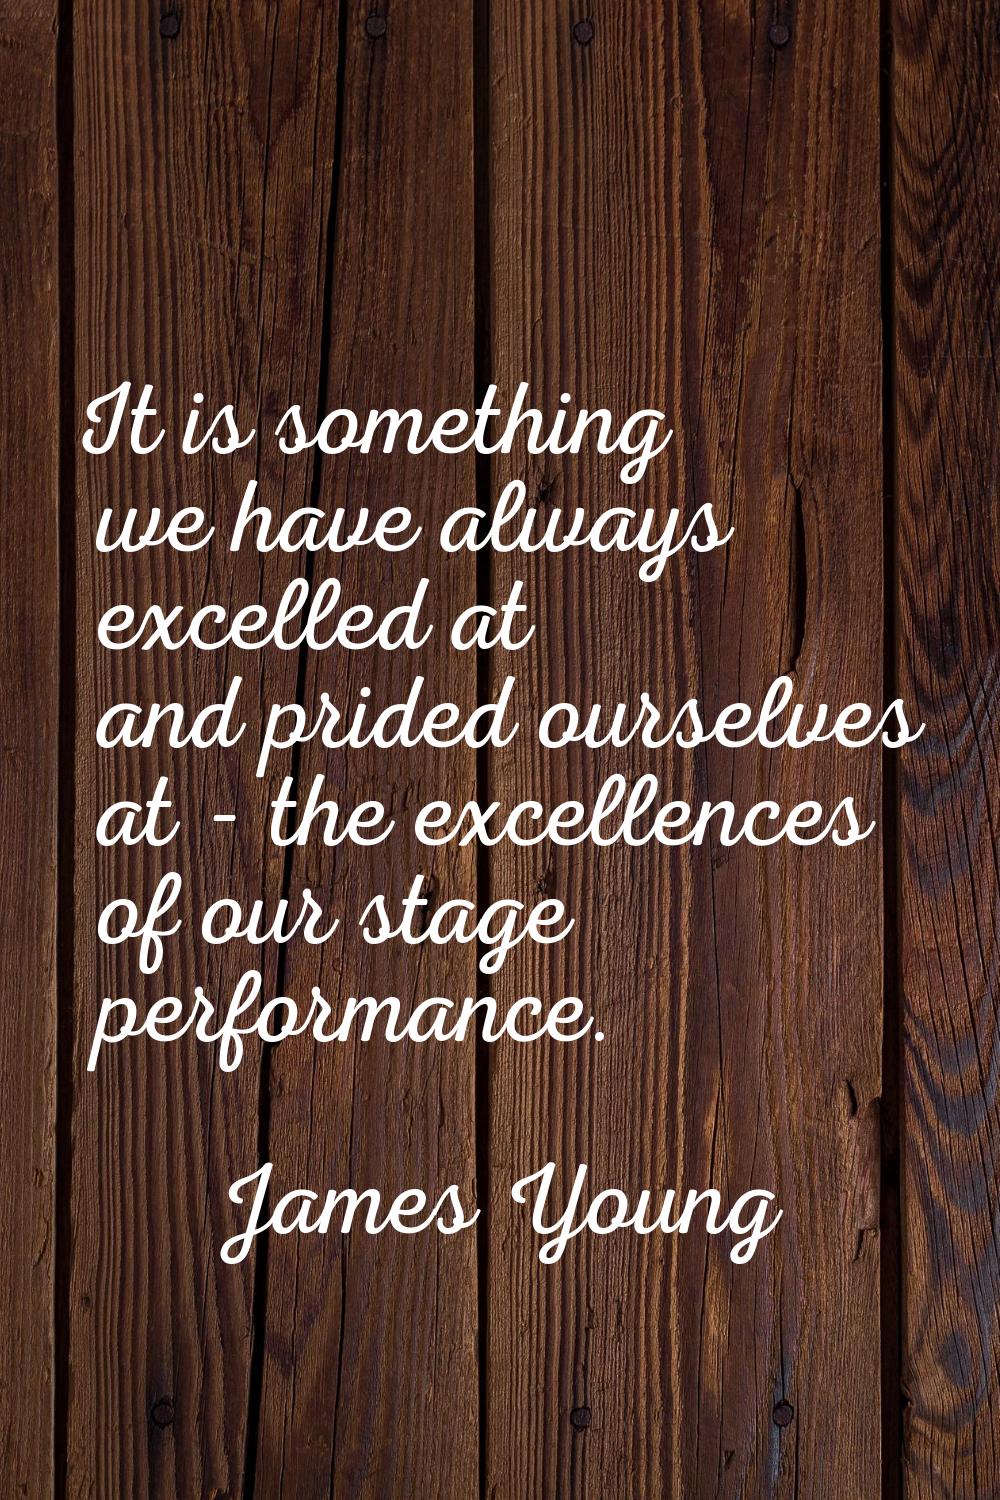 It is something we have always excelled at and prided ourselves at - the excellences of our stage p